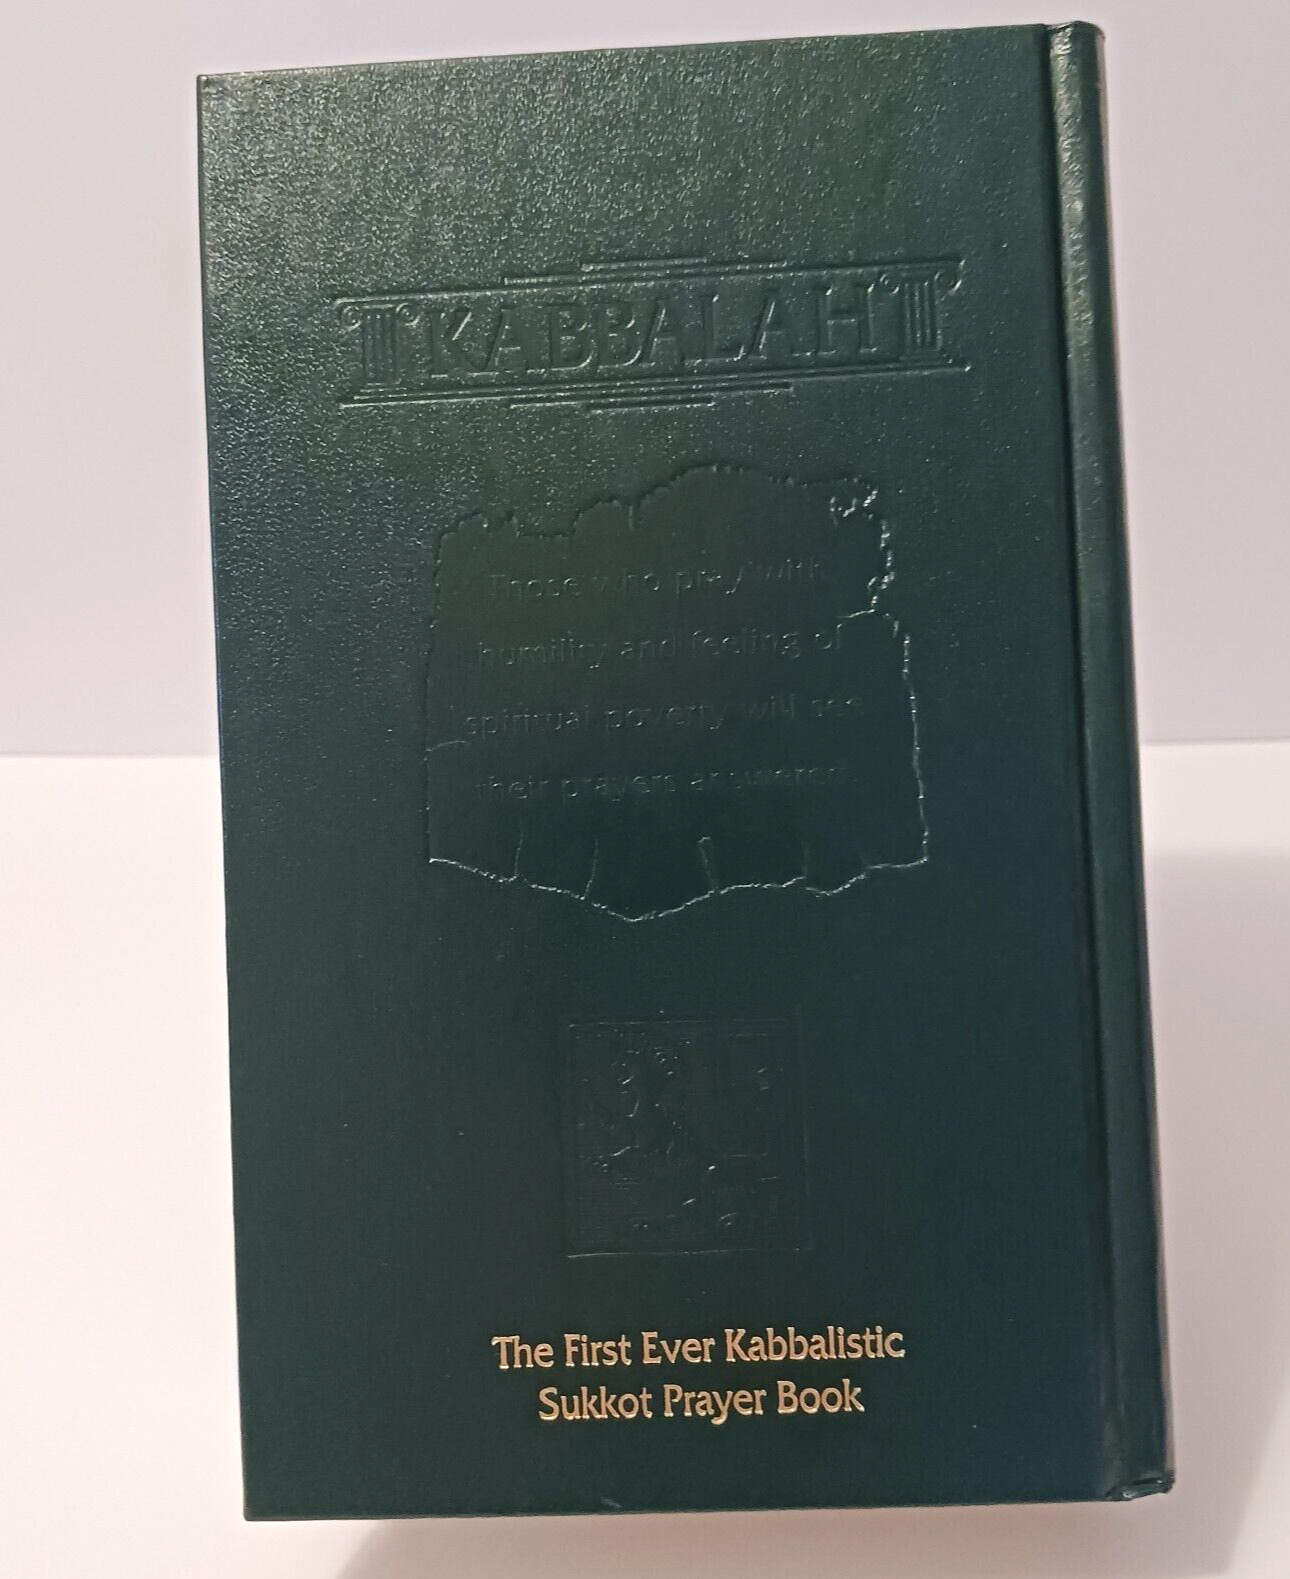 The First Ever Kabbalistic Sukkot Prayer Book, First Edition